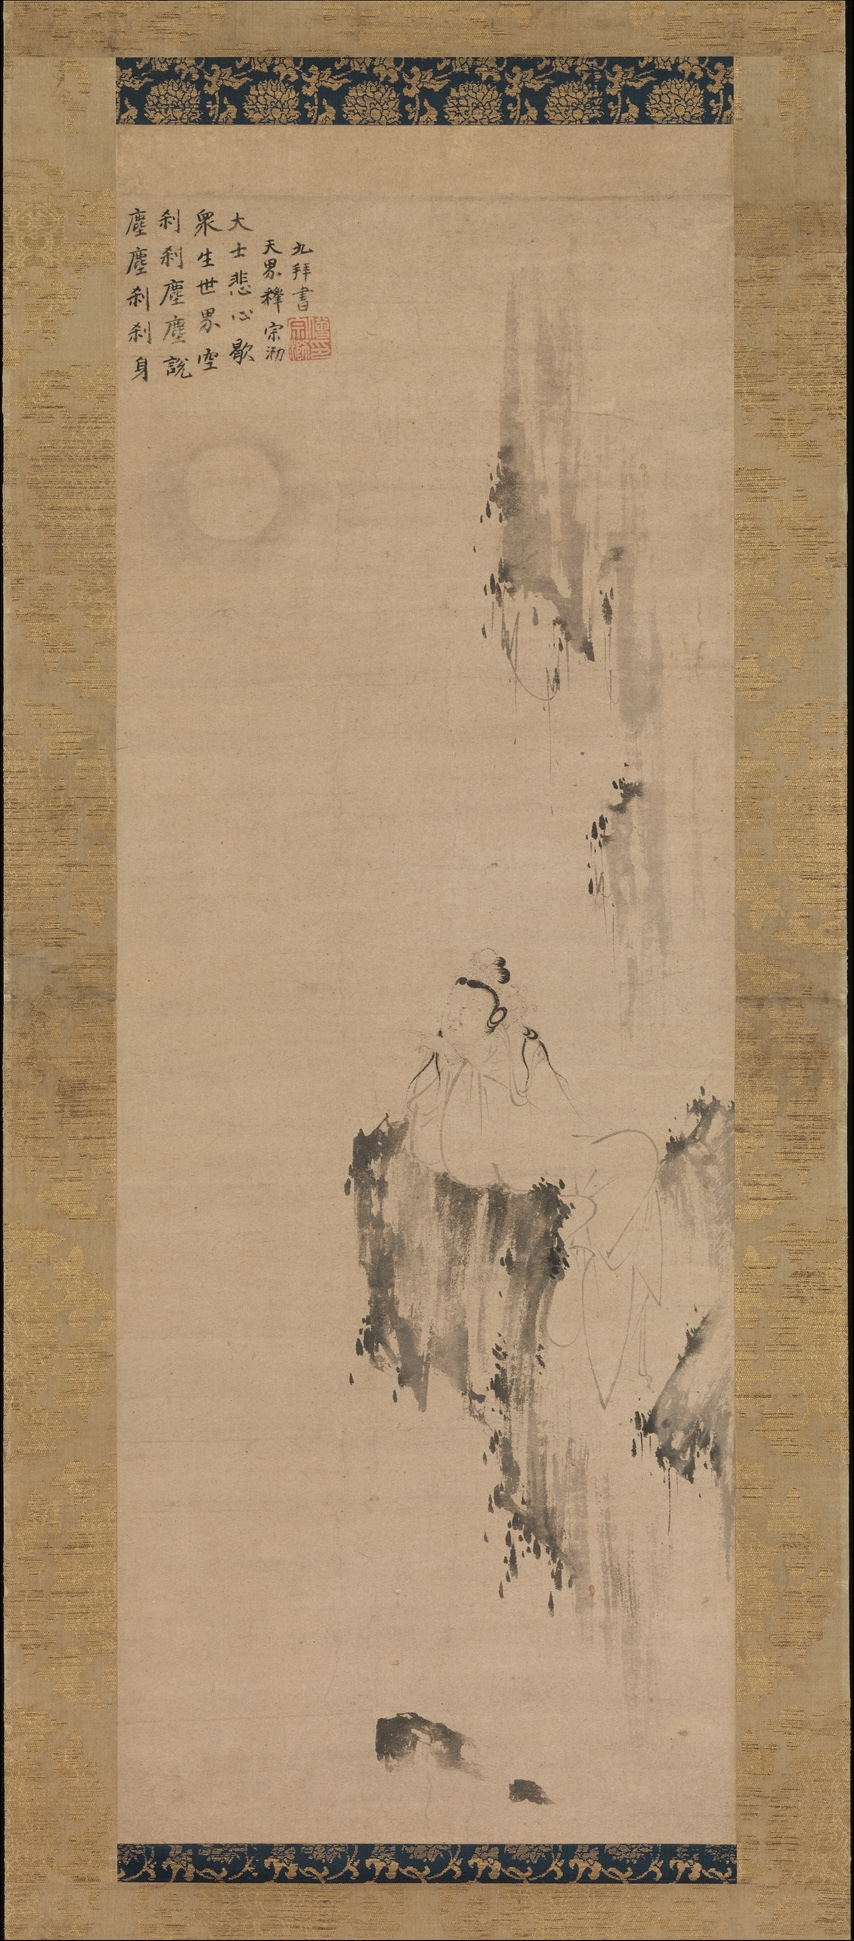 White-Robed Guanyin, hanging scroll, late 14th century, Ming dynasty, ink on paper, China, 91.4 x 32.7 cm (The Metropolitan Museum of Art)